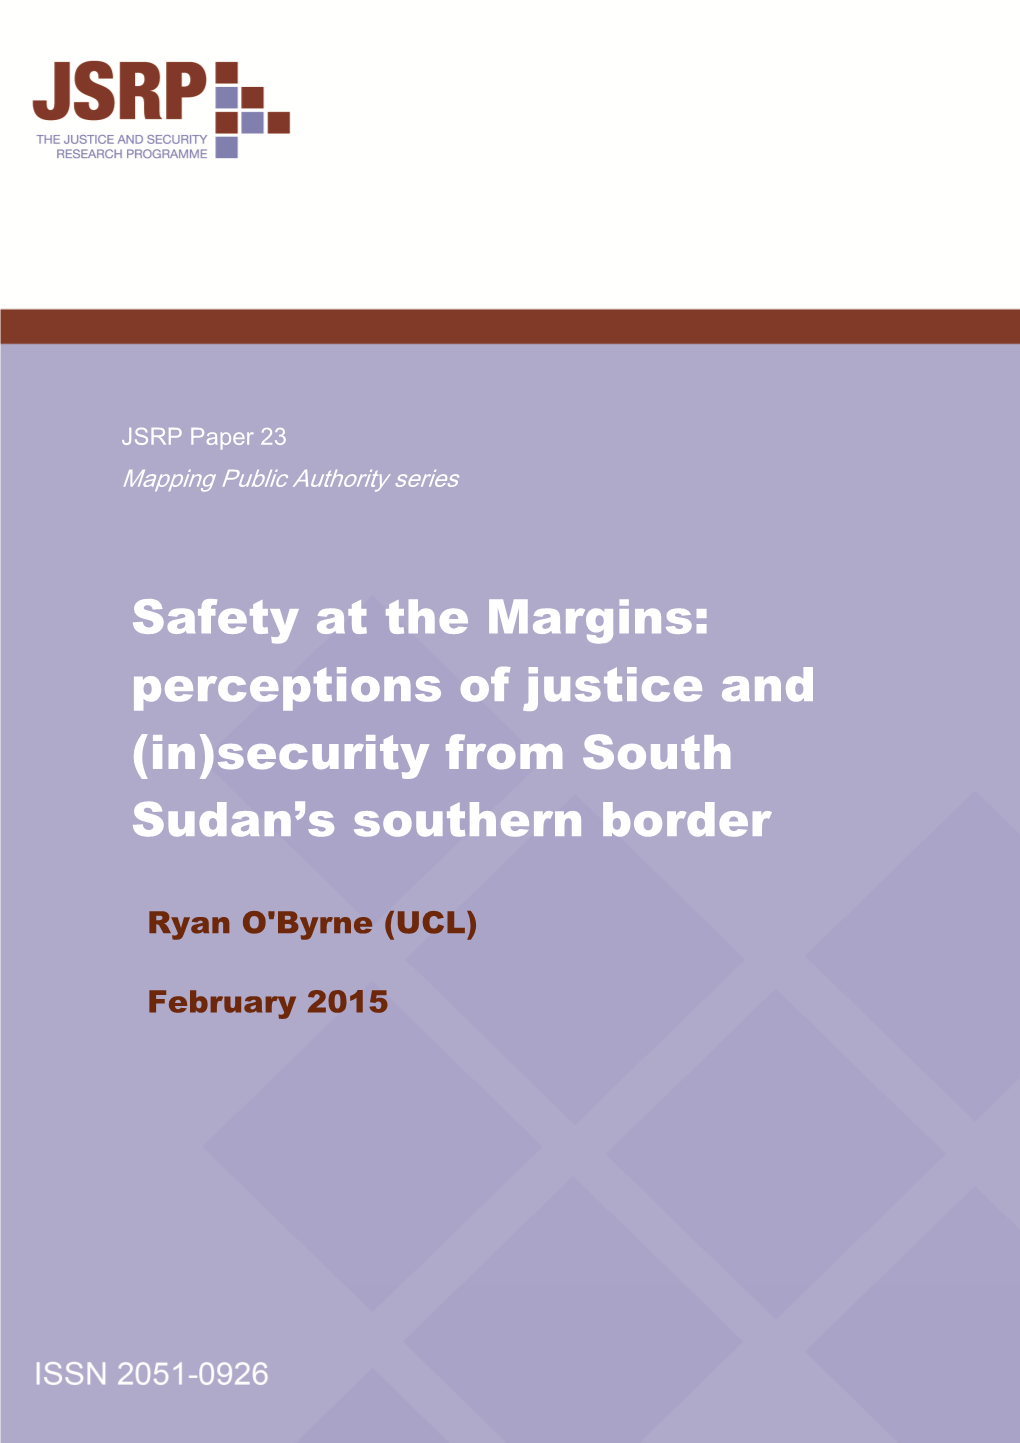 Perceptions of Justice and (In)Security from South Sudan's Southern Border